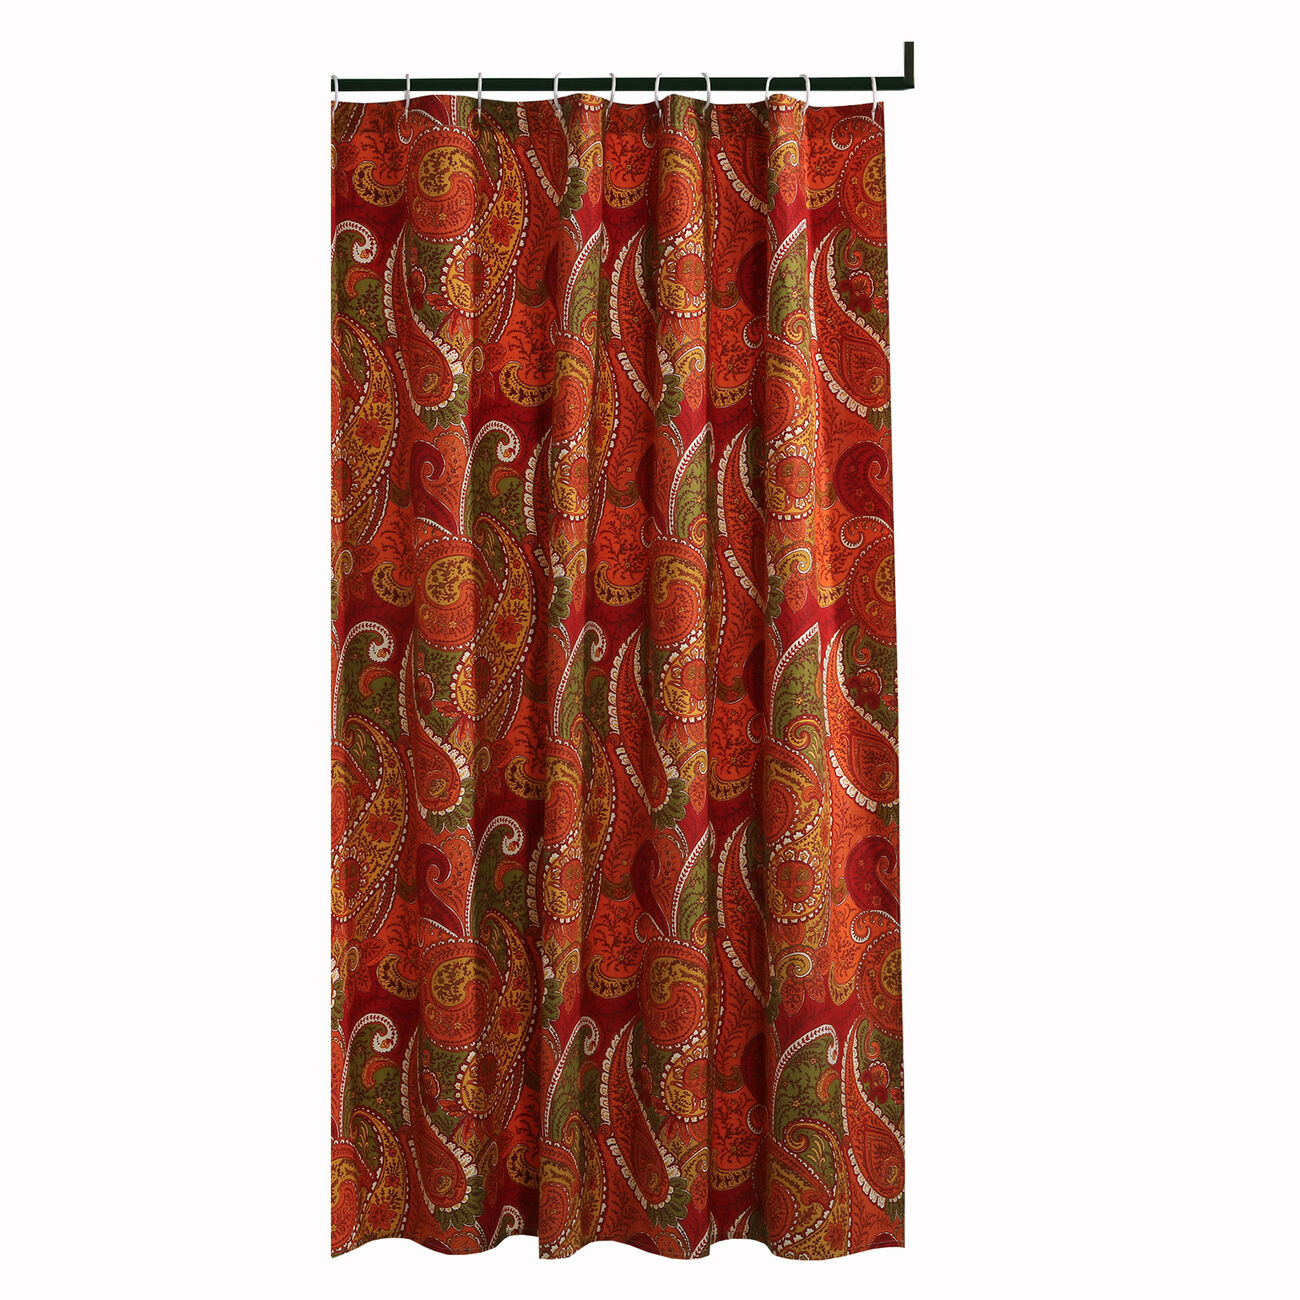 72 x 72 Polyester Shower Curtain with Paisley Print, Cinnamon Red